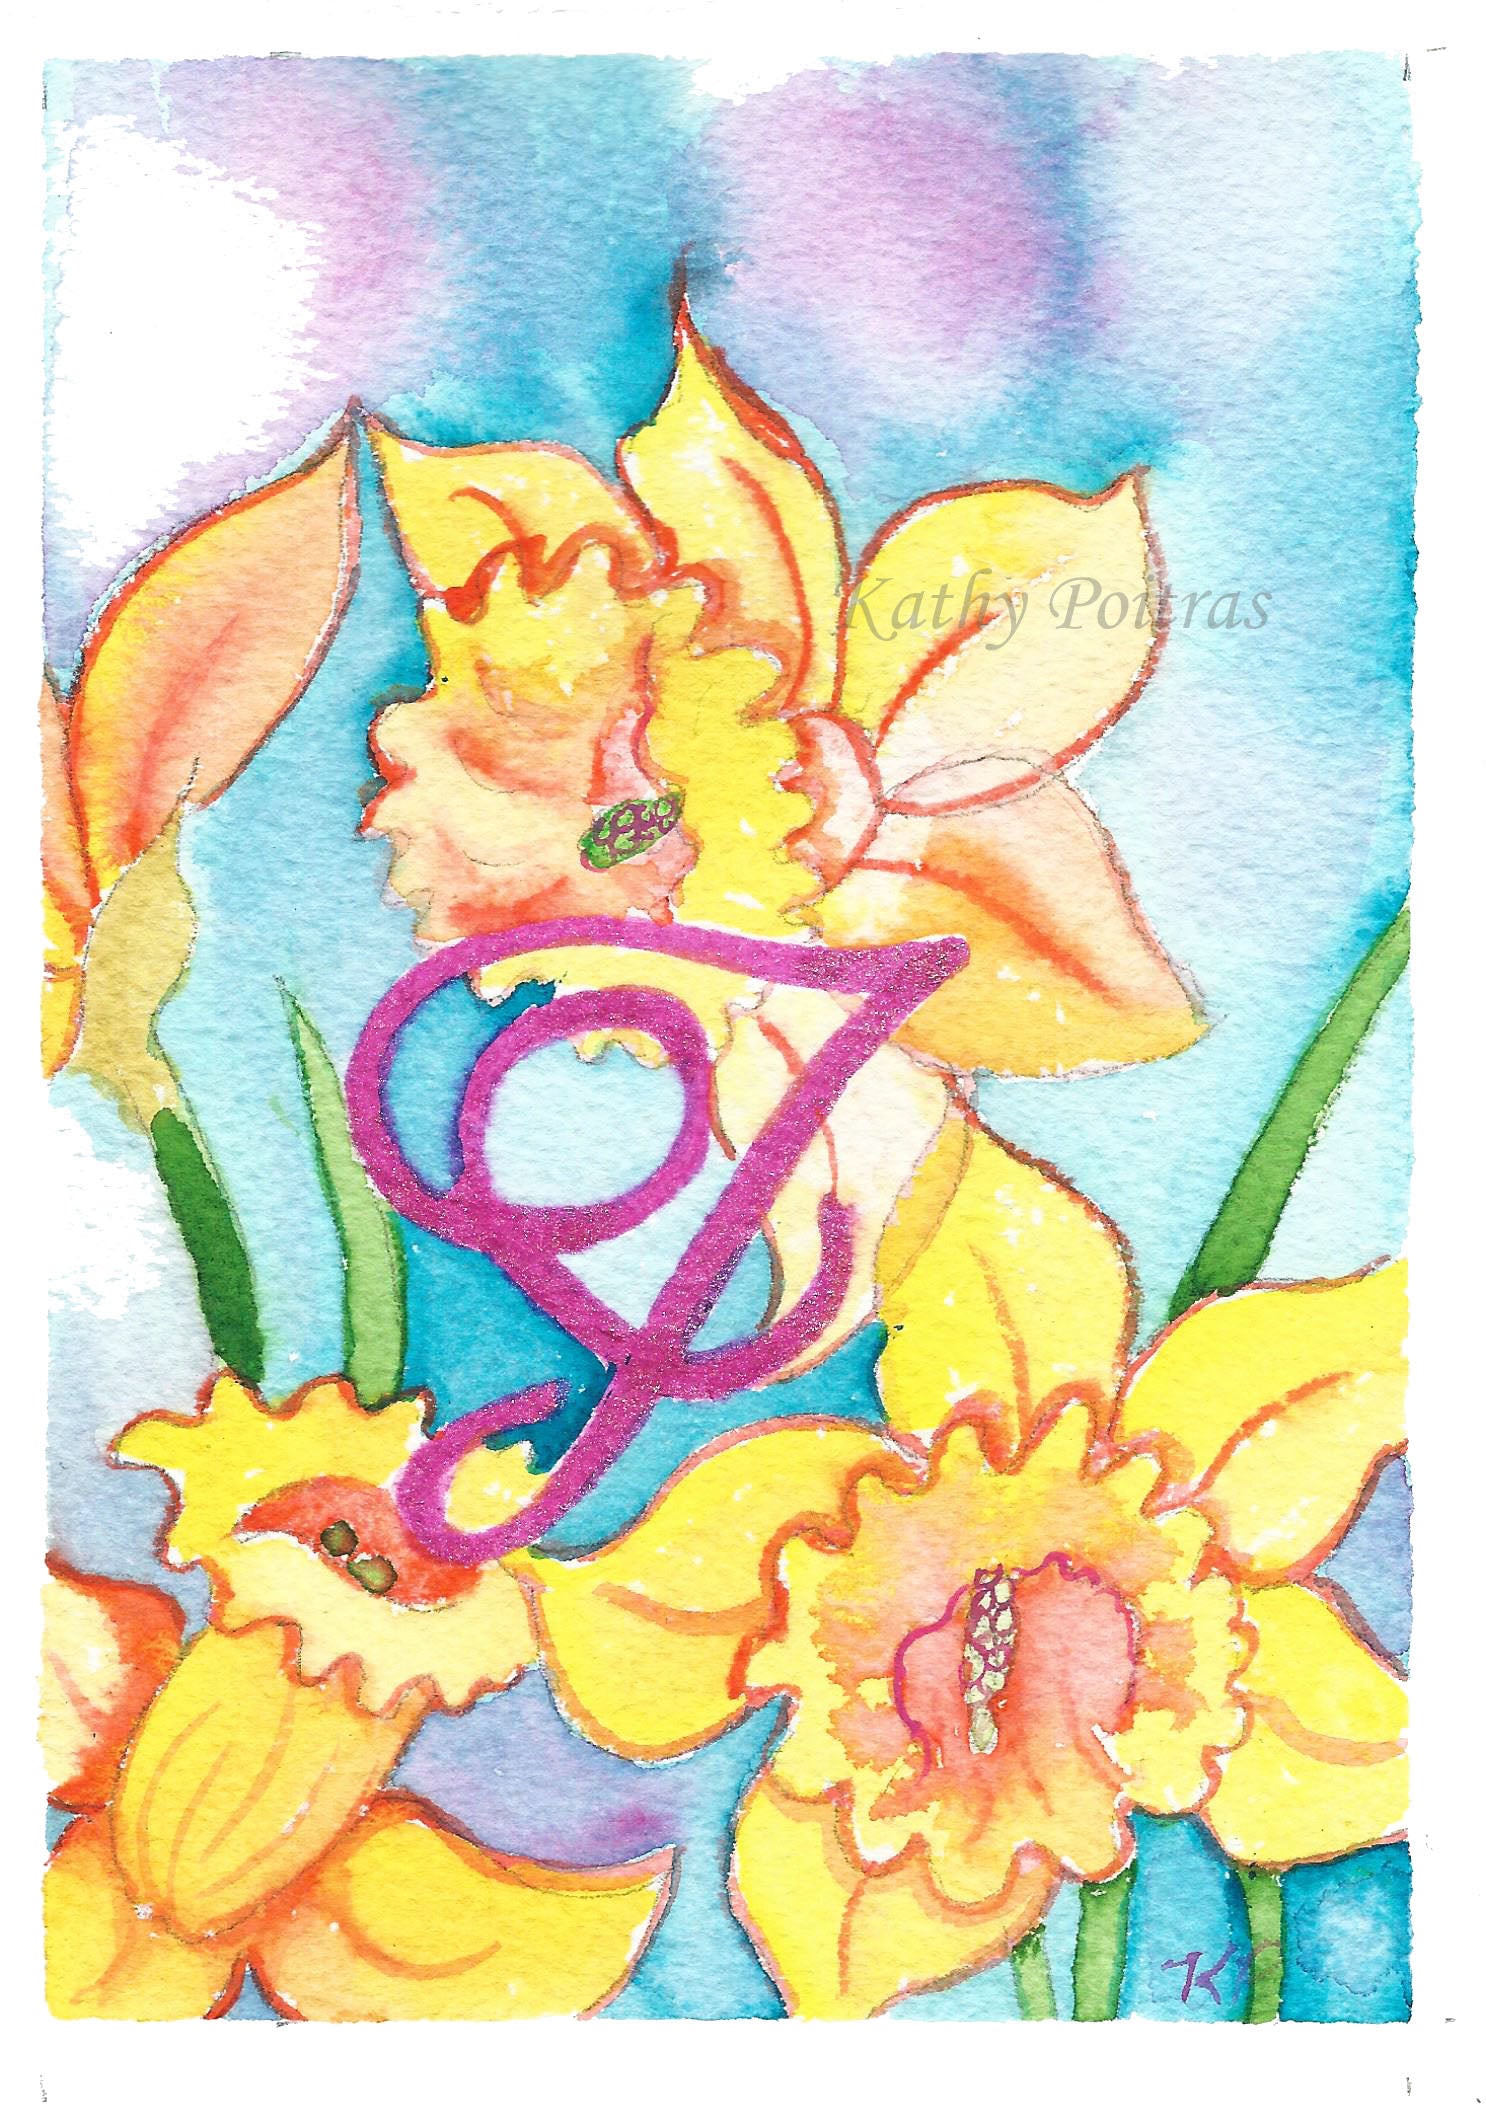 Original hand painted daffodils inspired by the birth flower of the month for March. This greeting card is an individual painting, watercolor and ink painted on arches 100% cotton paper. personalized with a fancy letter J as part of the painting. by Canadian artist Kathy Poitras.